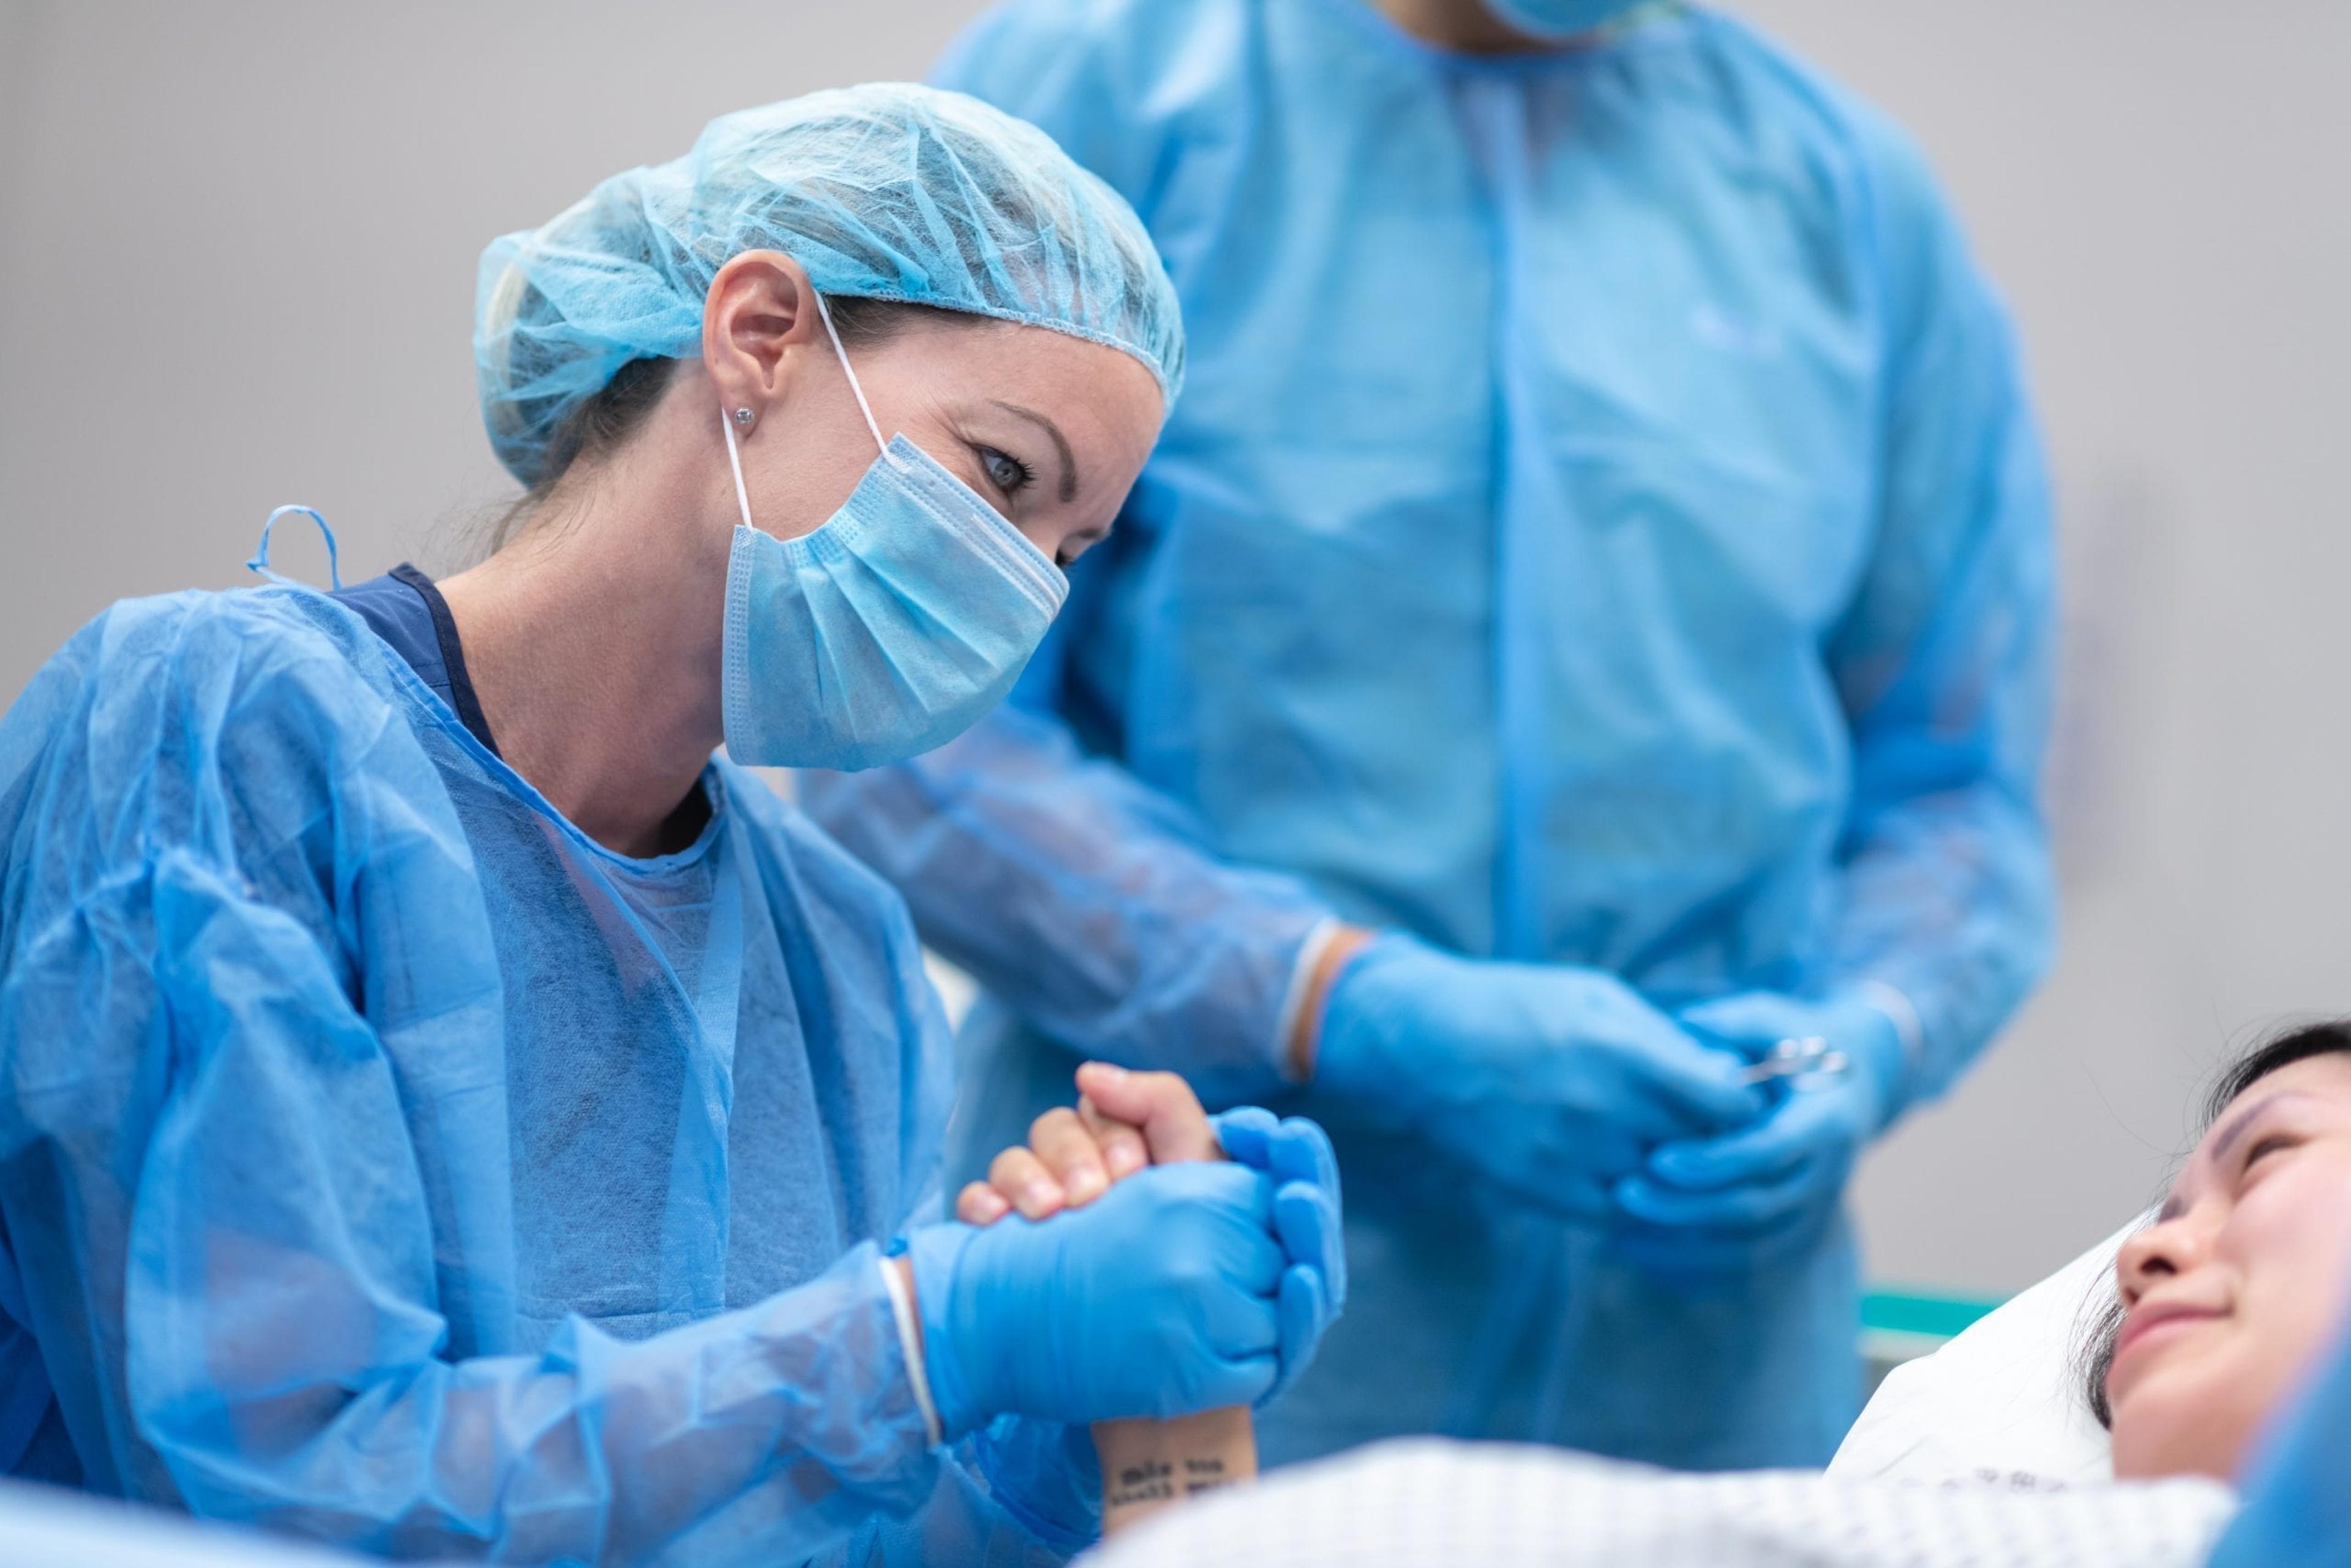 Hospital worker holding the hand of a surgery patient